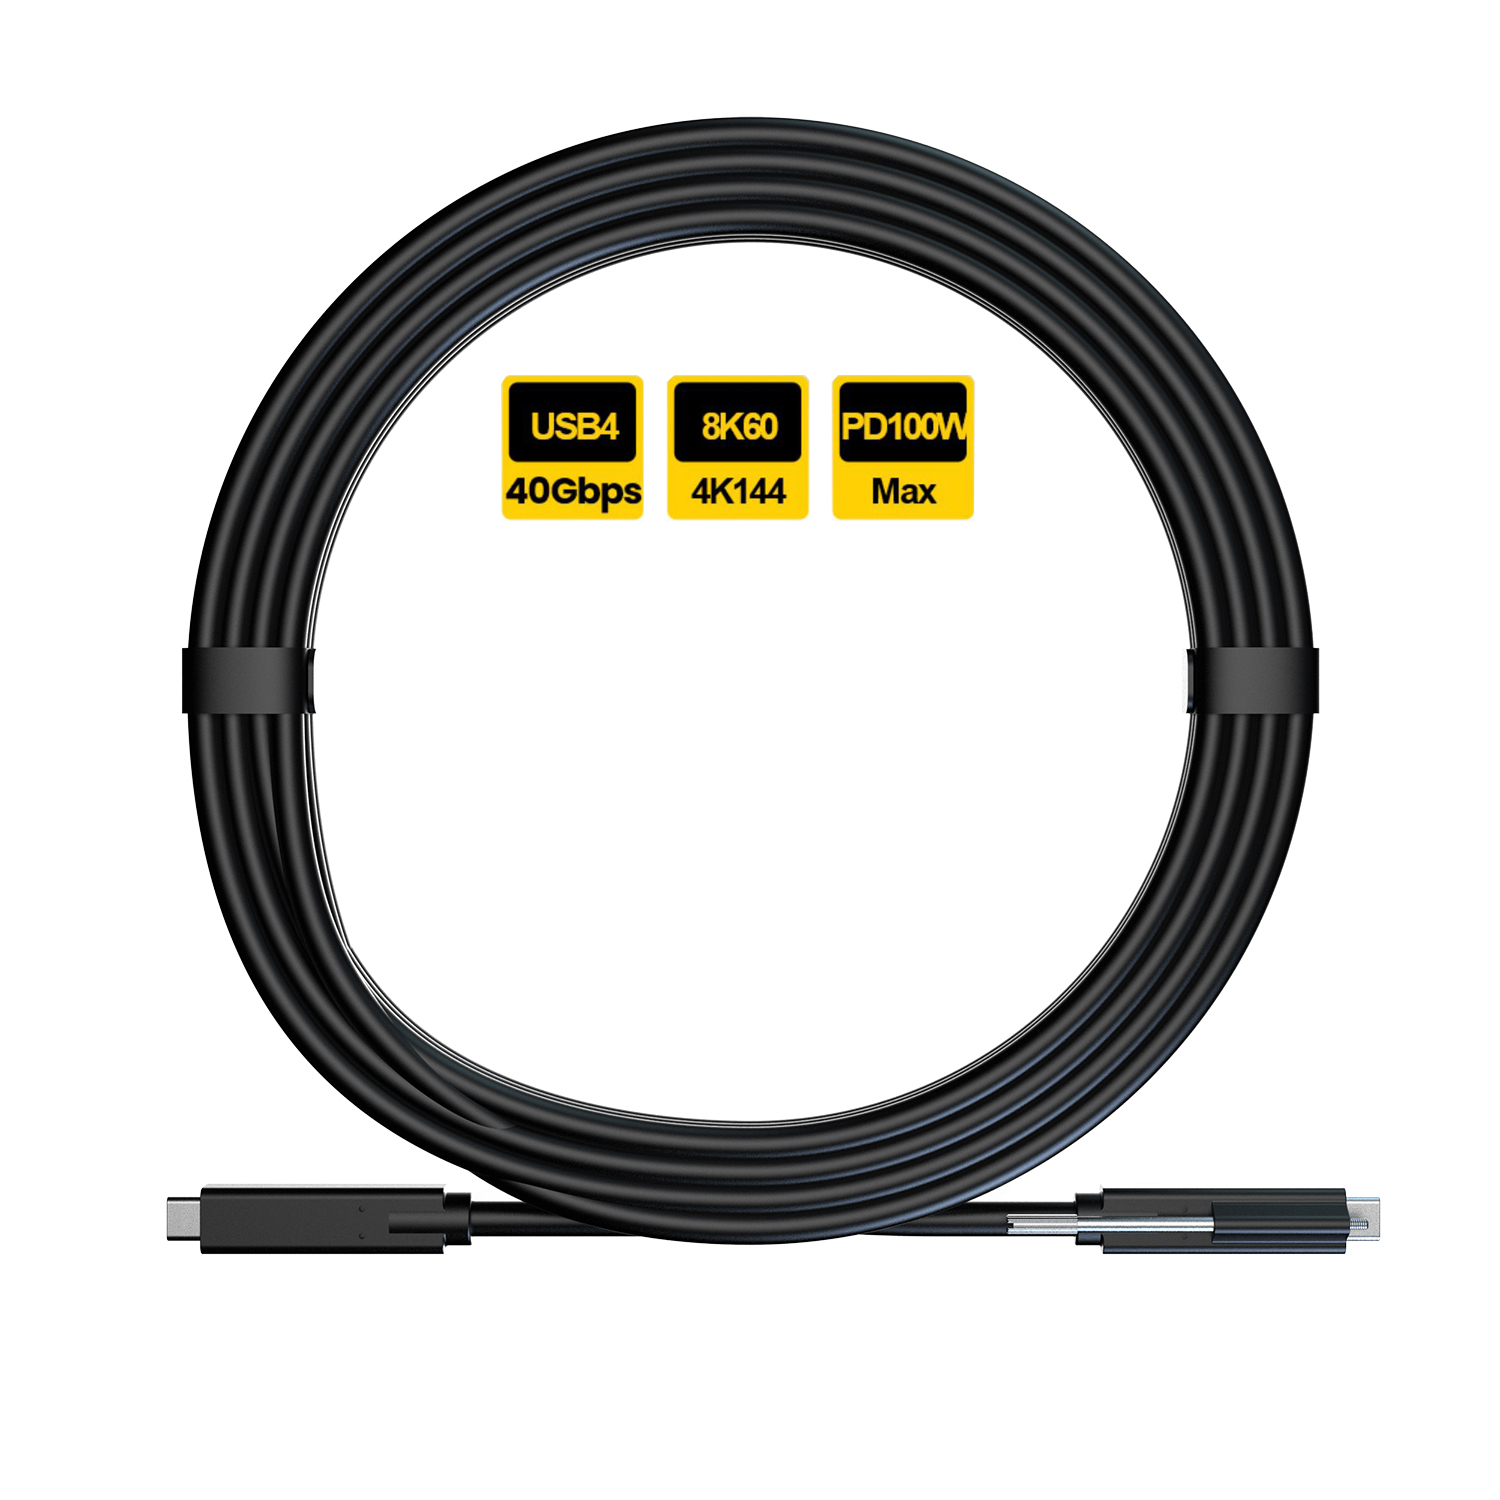 USB4 AOC - 40Gbps High-Speed Active Optical Cable